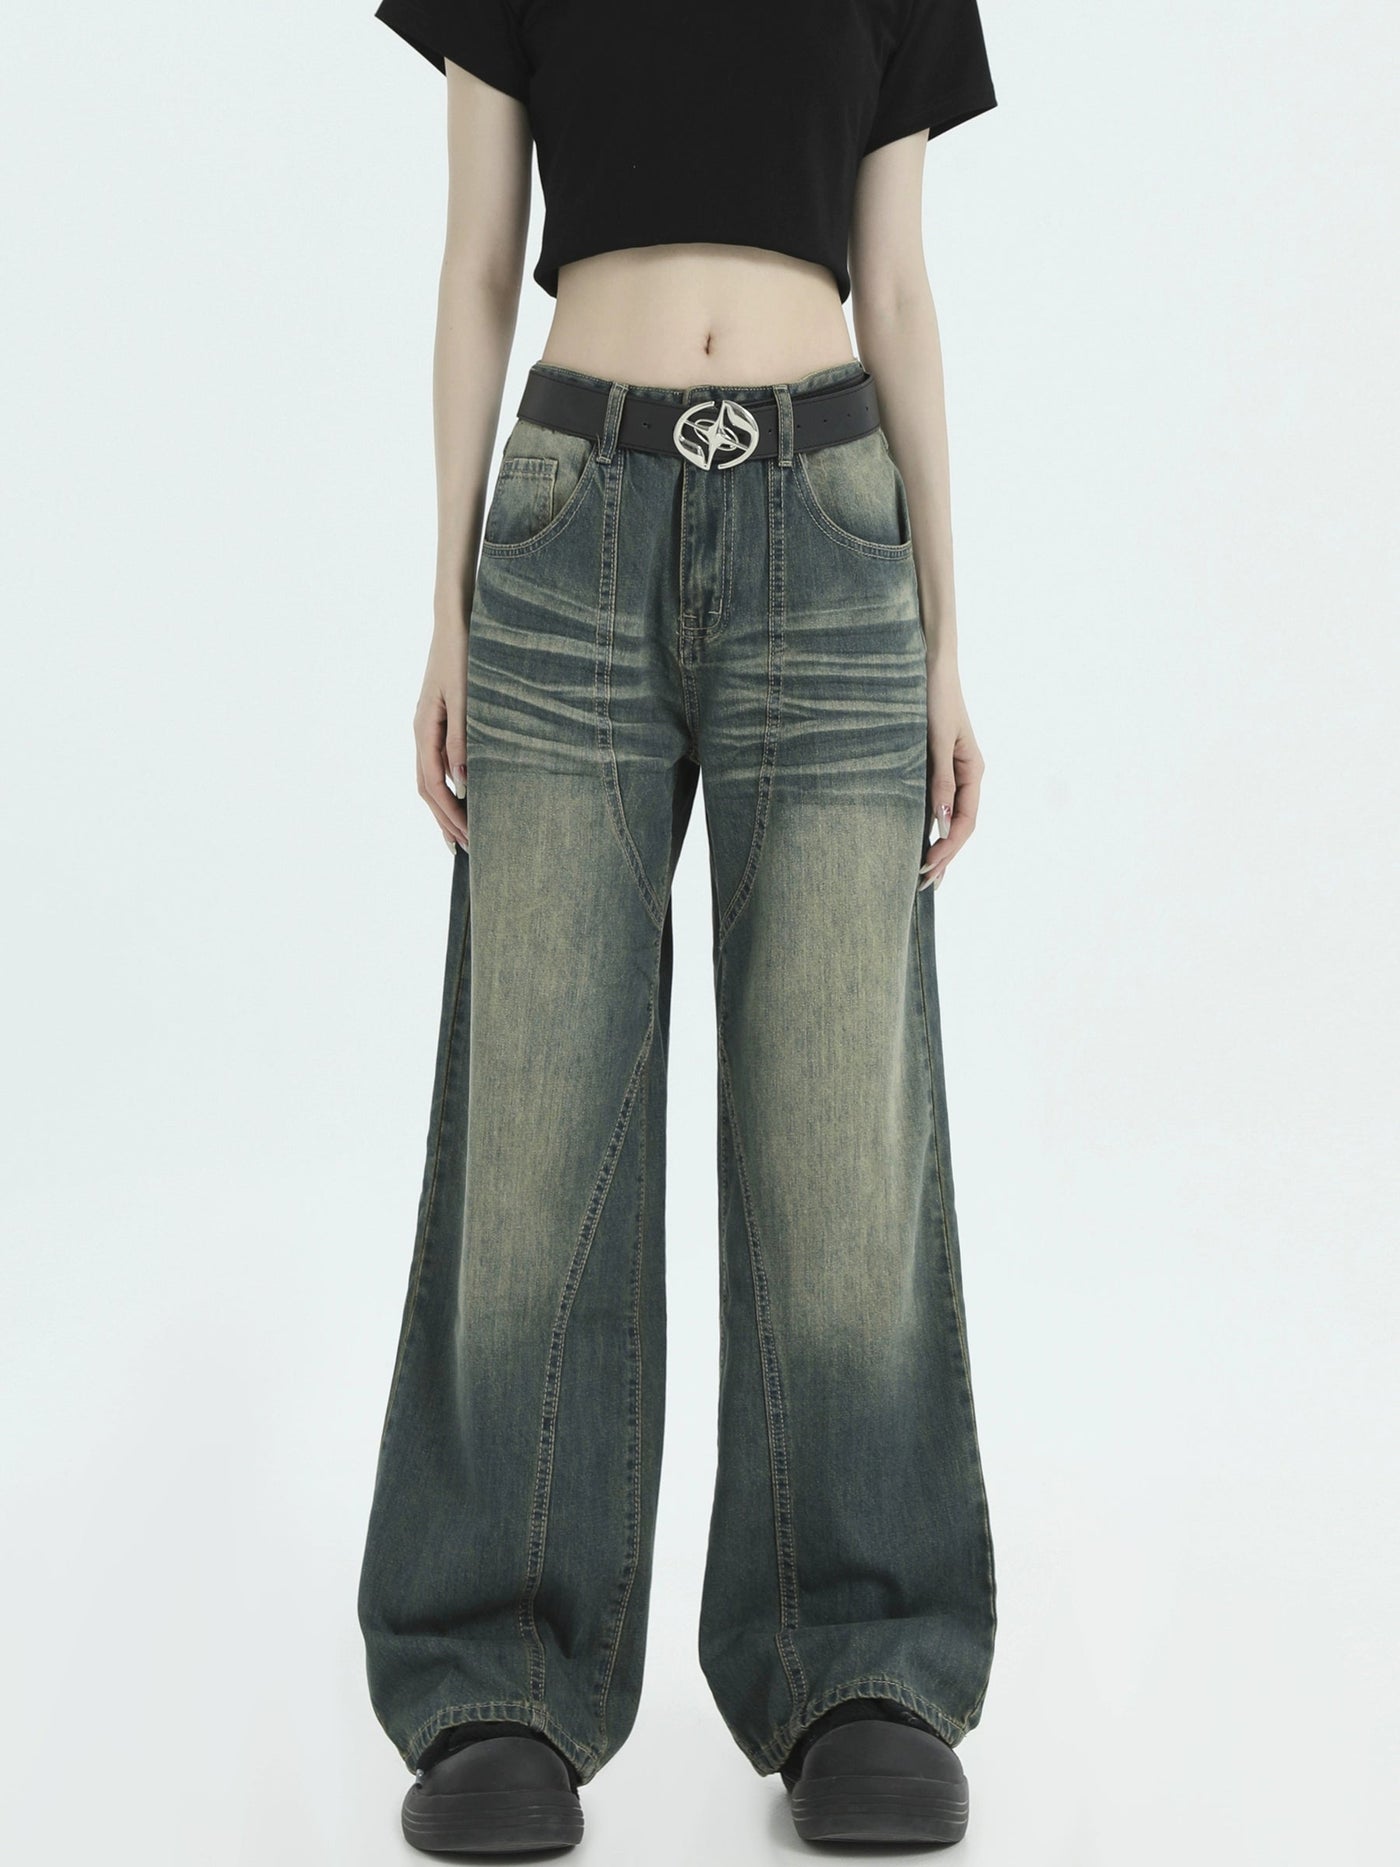 Whiskers and Fade Emphasis Jeans Korean Street Fashion Jeans By INS Korea Shop Online at OH Vault